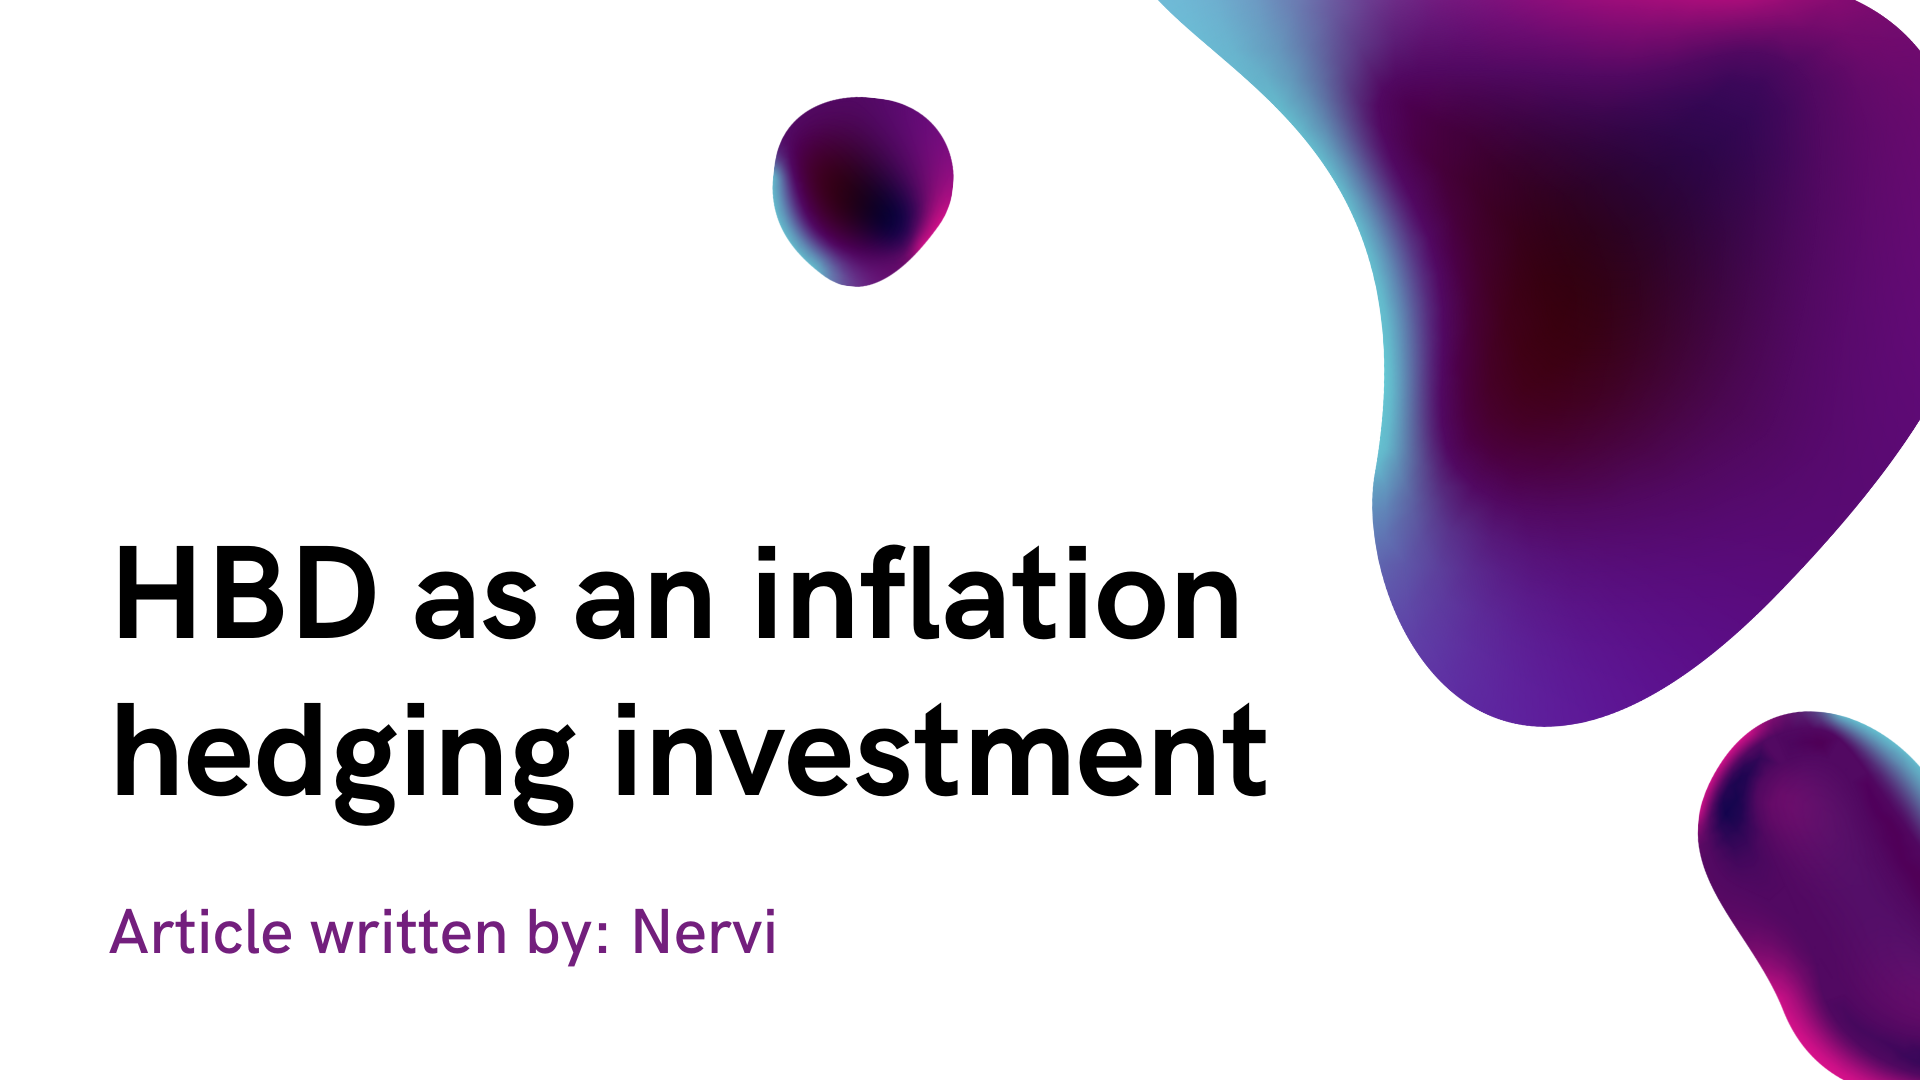 @nervi/hbd-as-an-inflation-hedging-investment